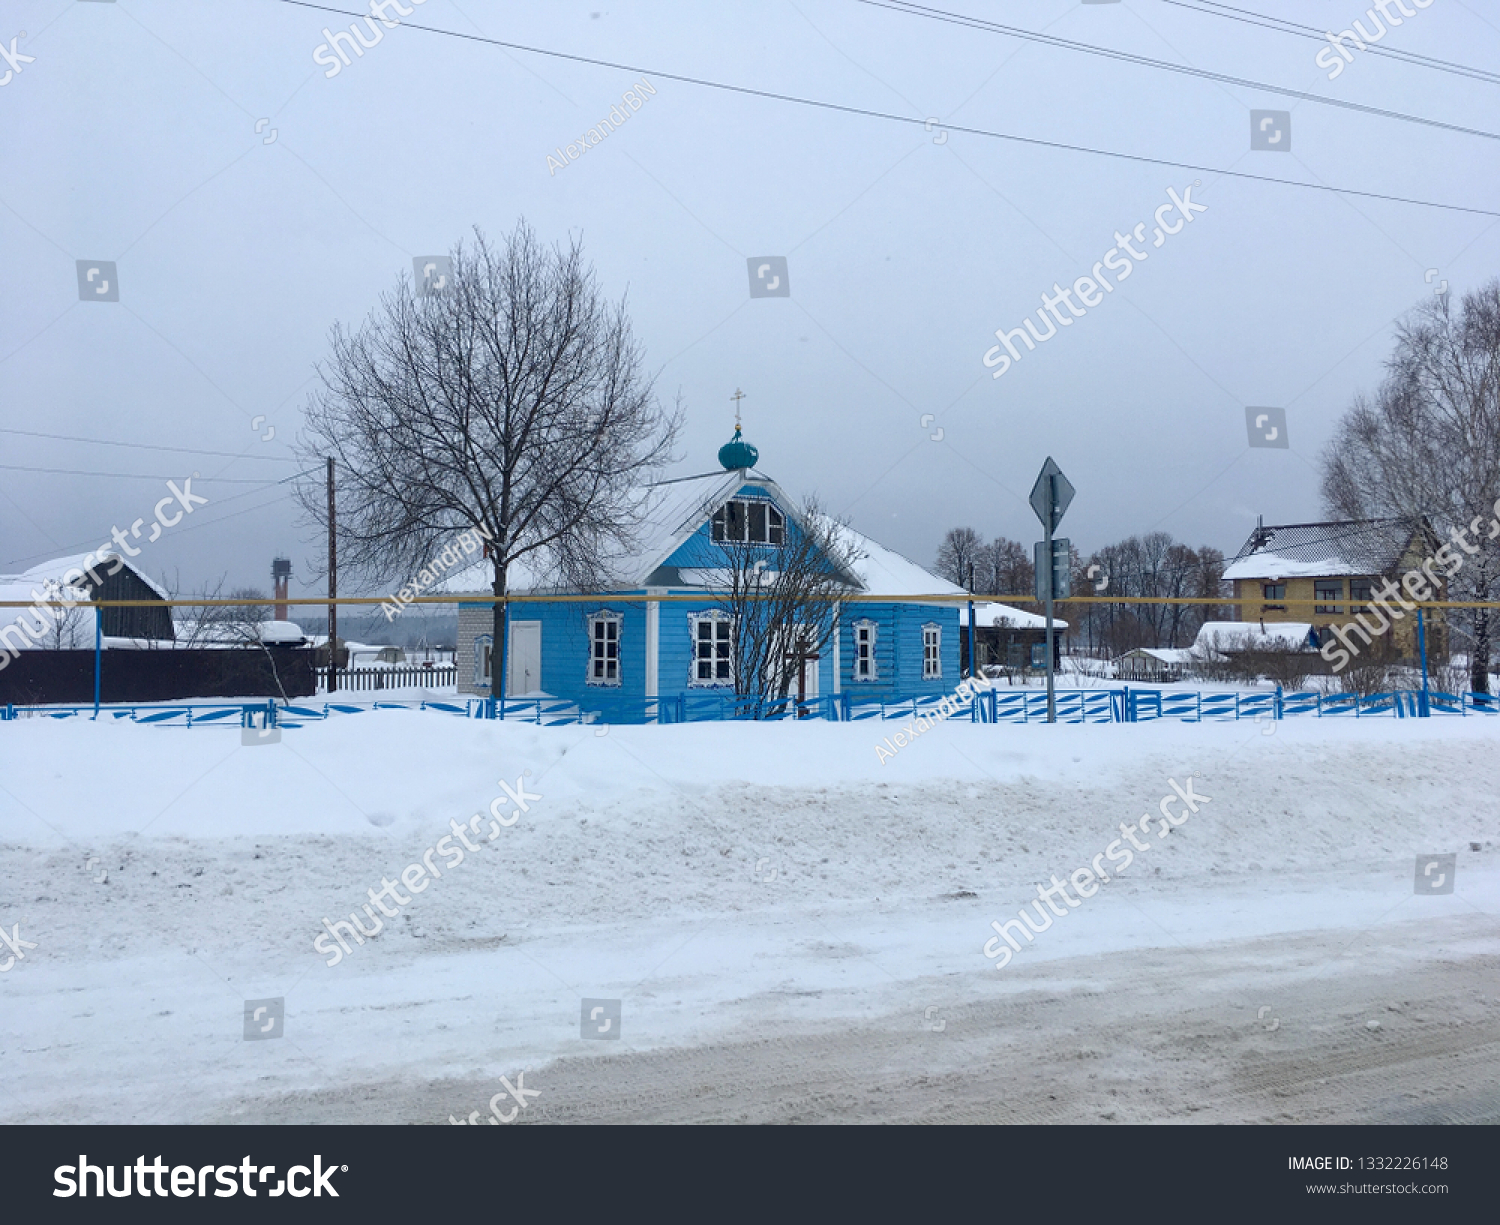 Photo chapel in rural rural areas in the winter, spring in the snow among houses have road #1332226148